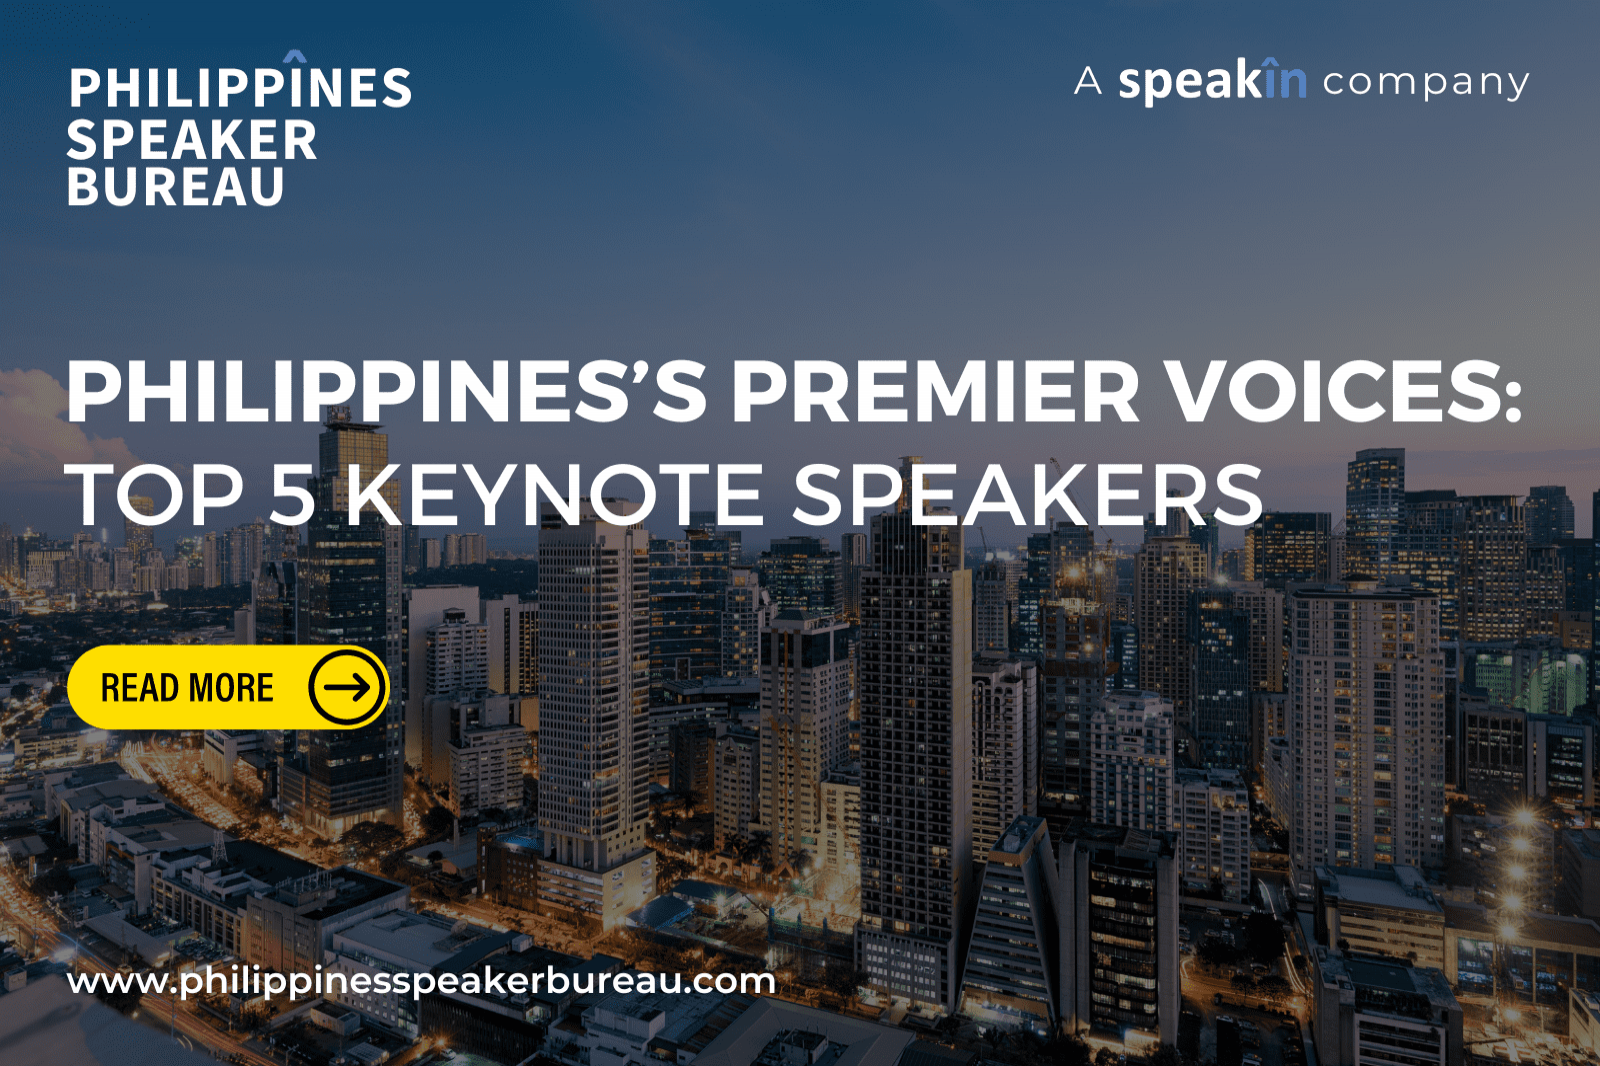 Philippines' Premier Voices: Showcasing the Top 3 Keynote Speakers